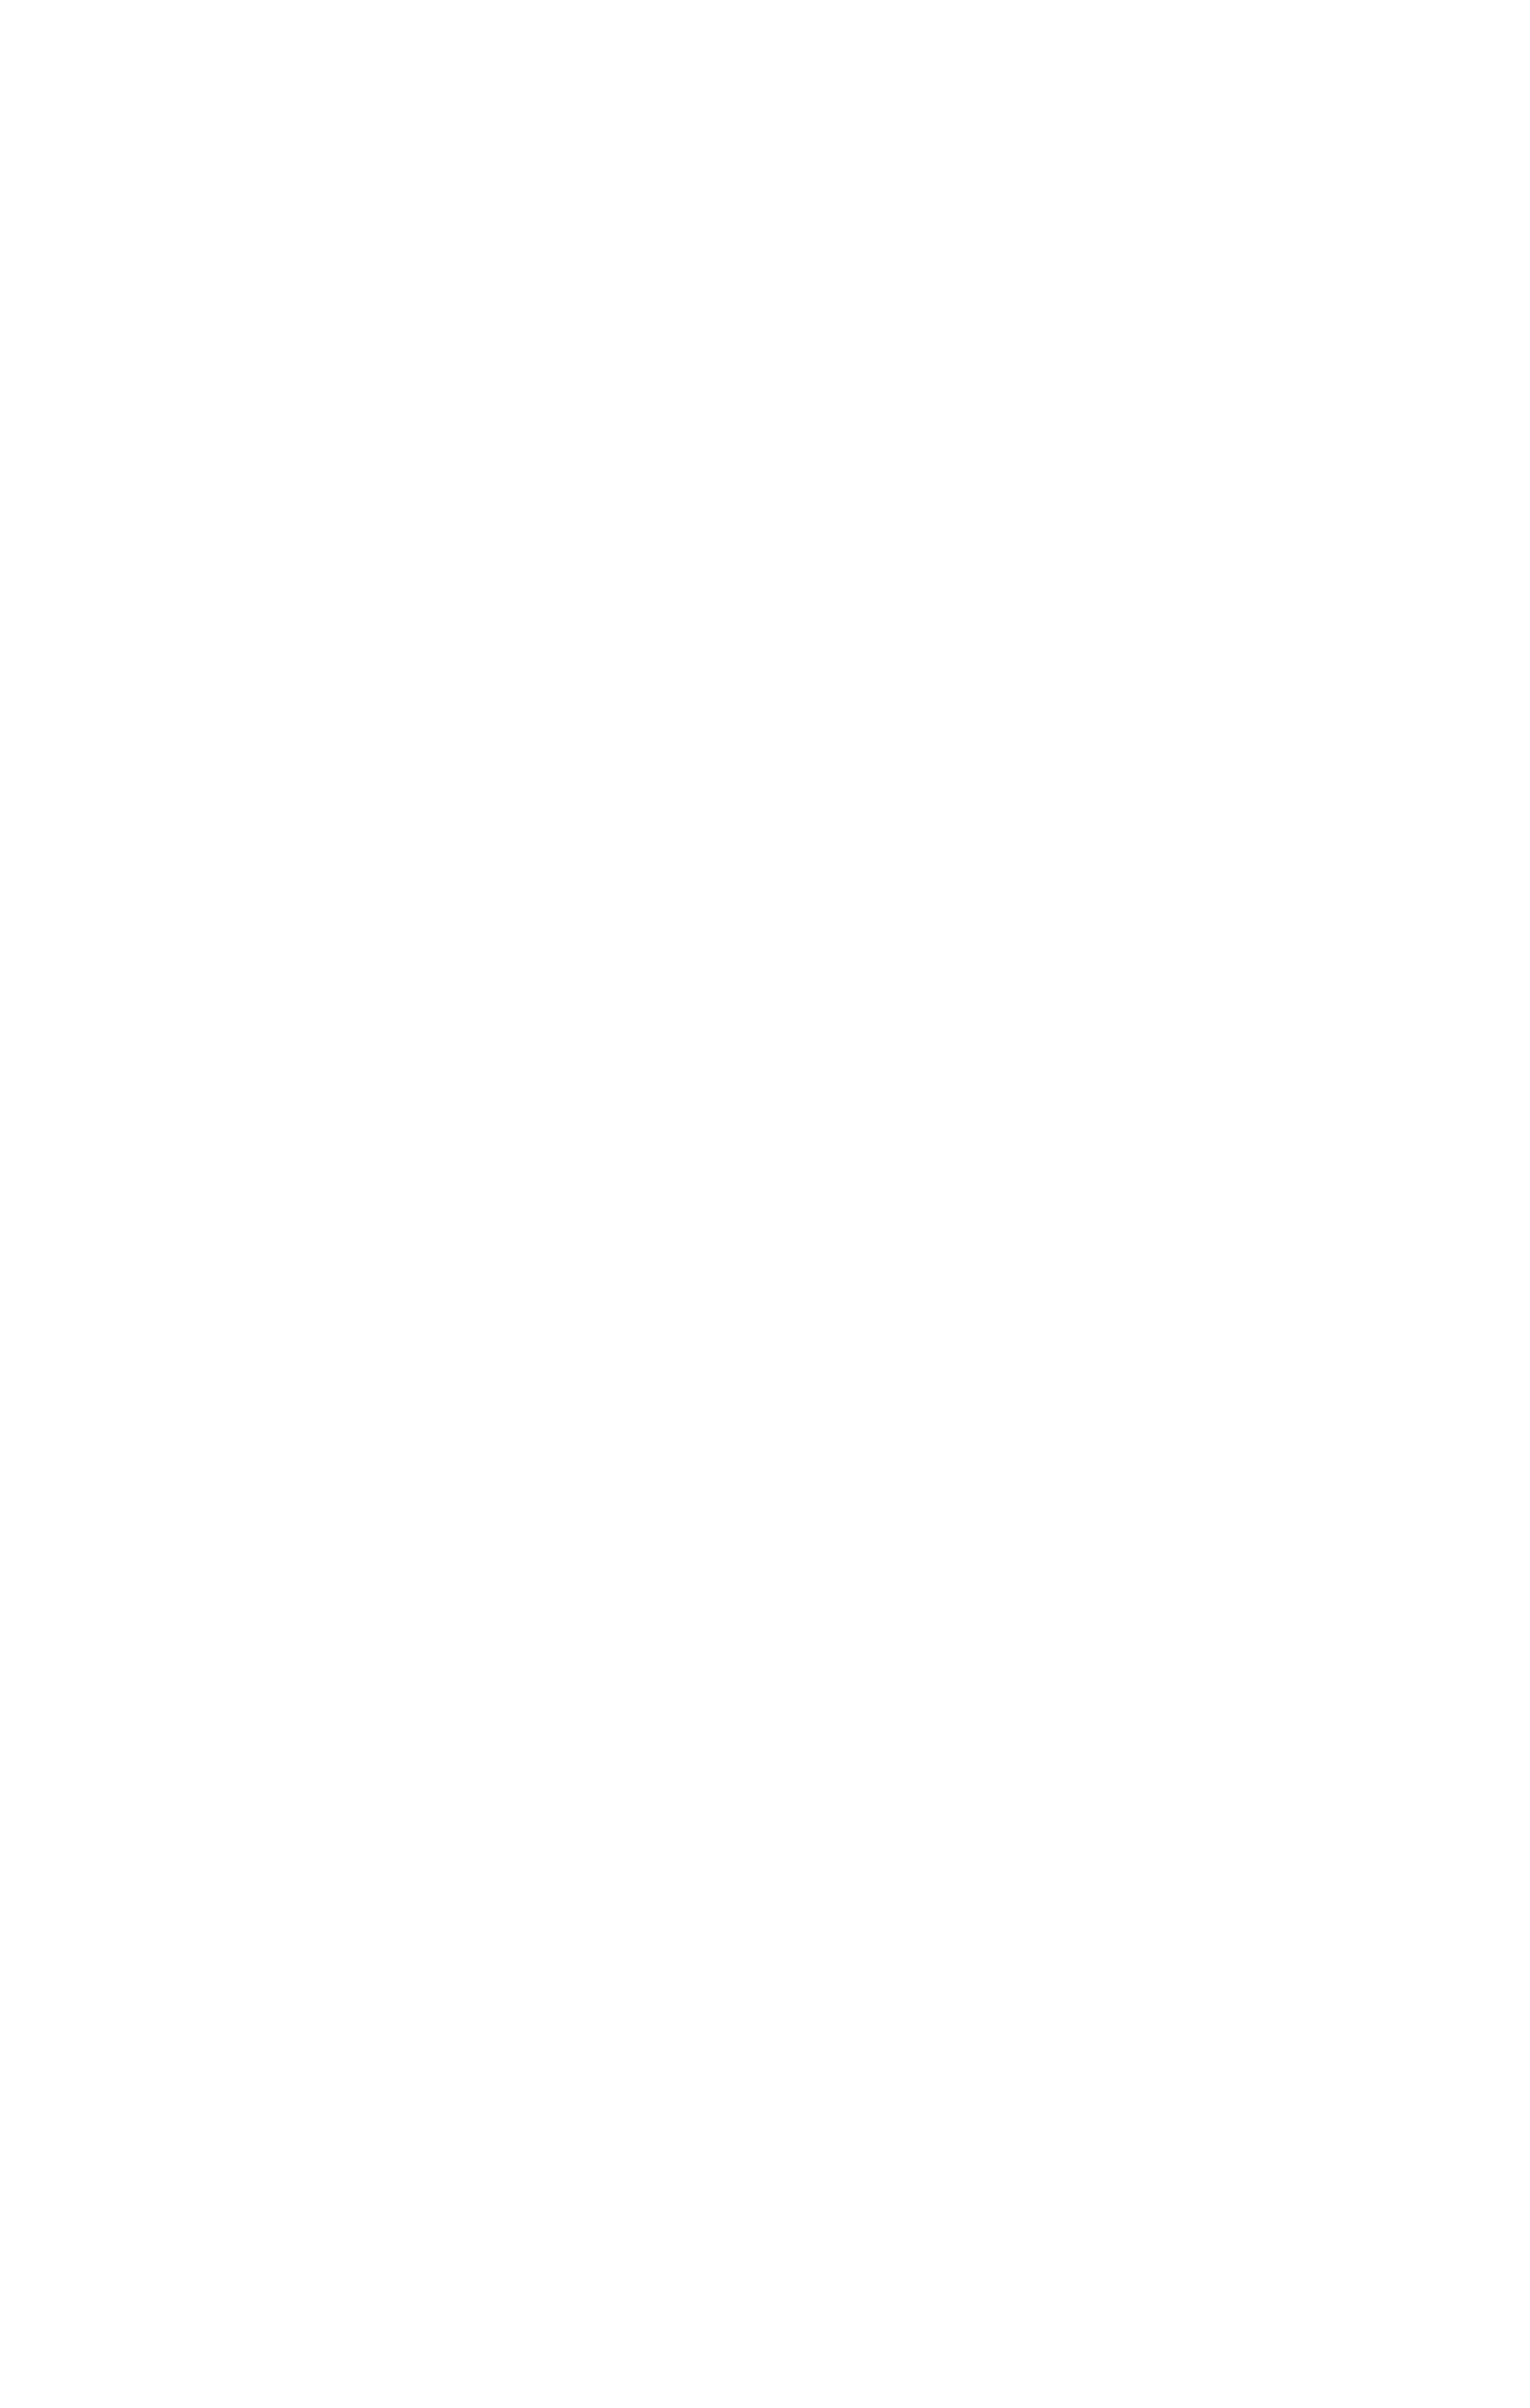 A Little School With A Big Heart